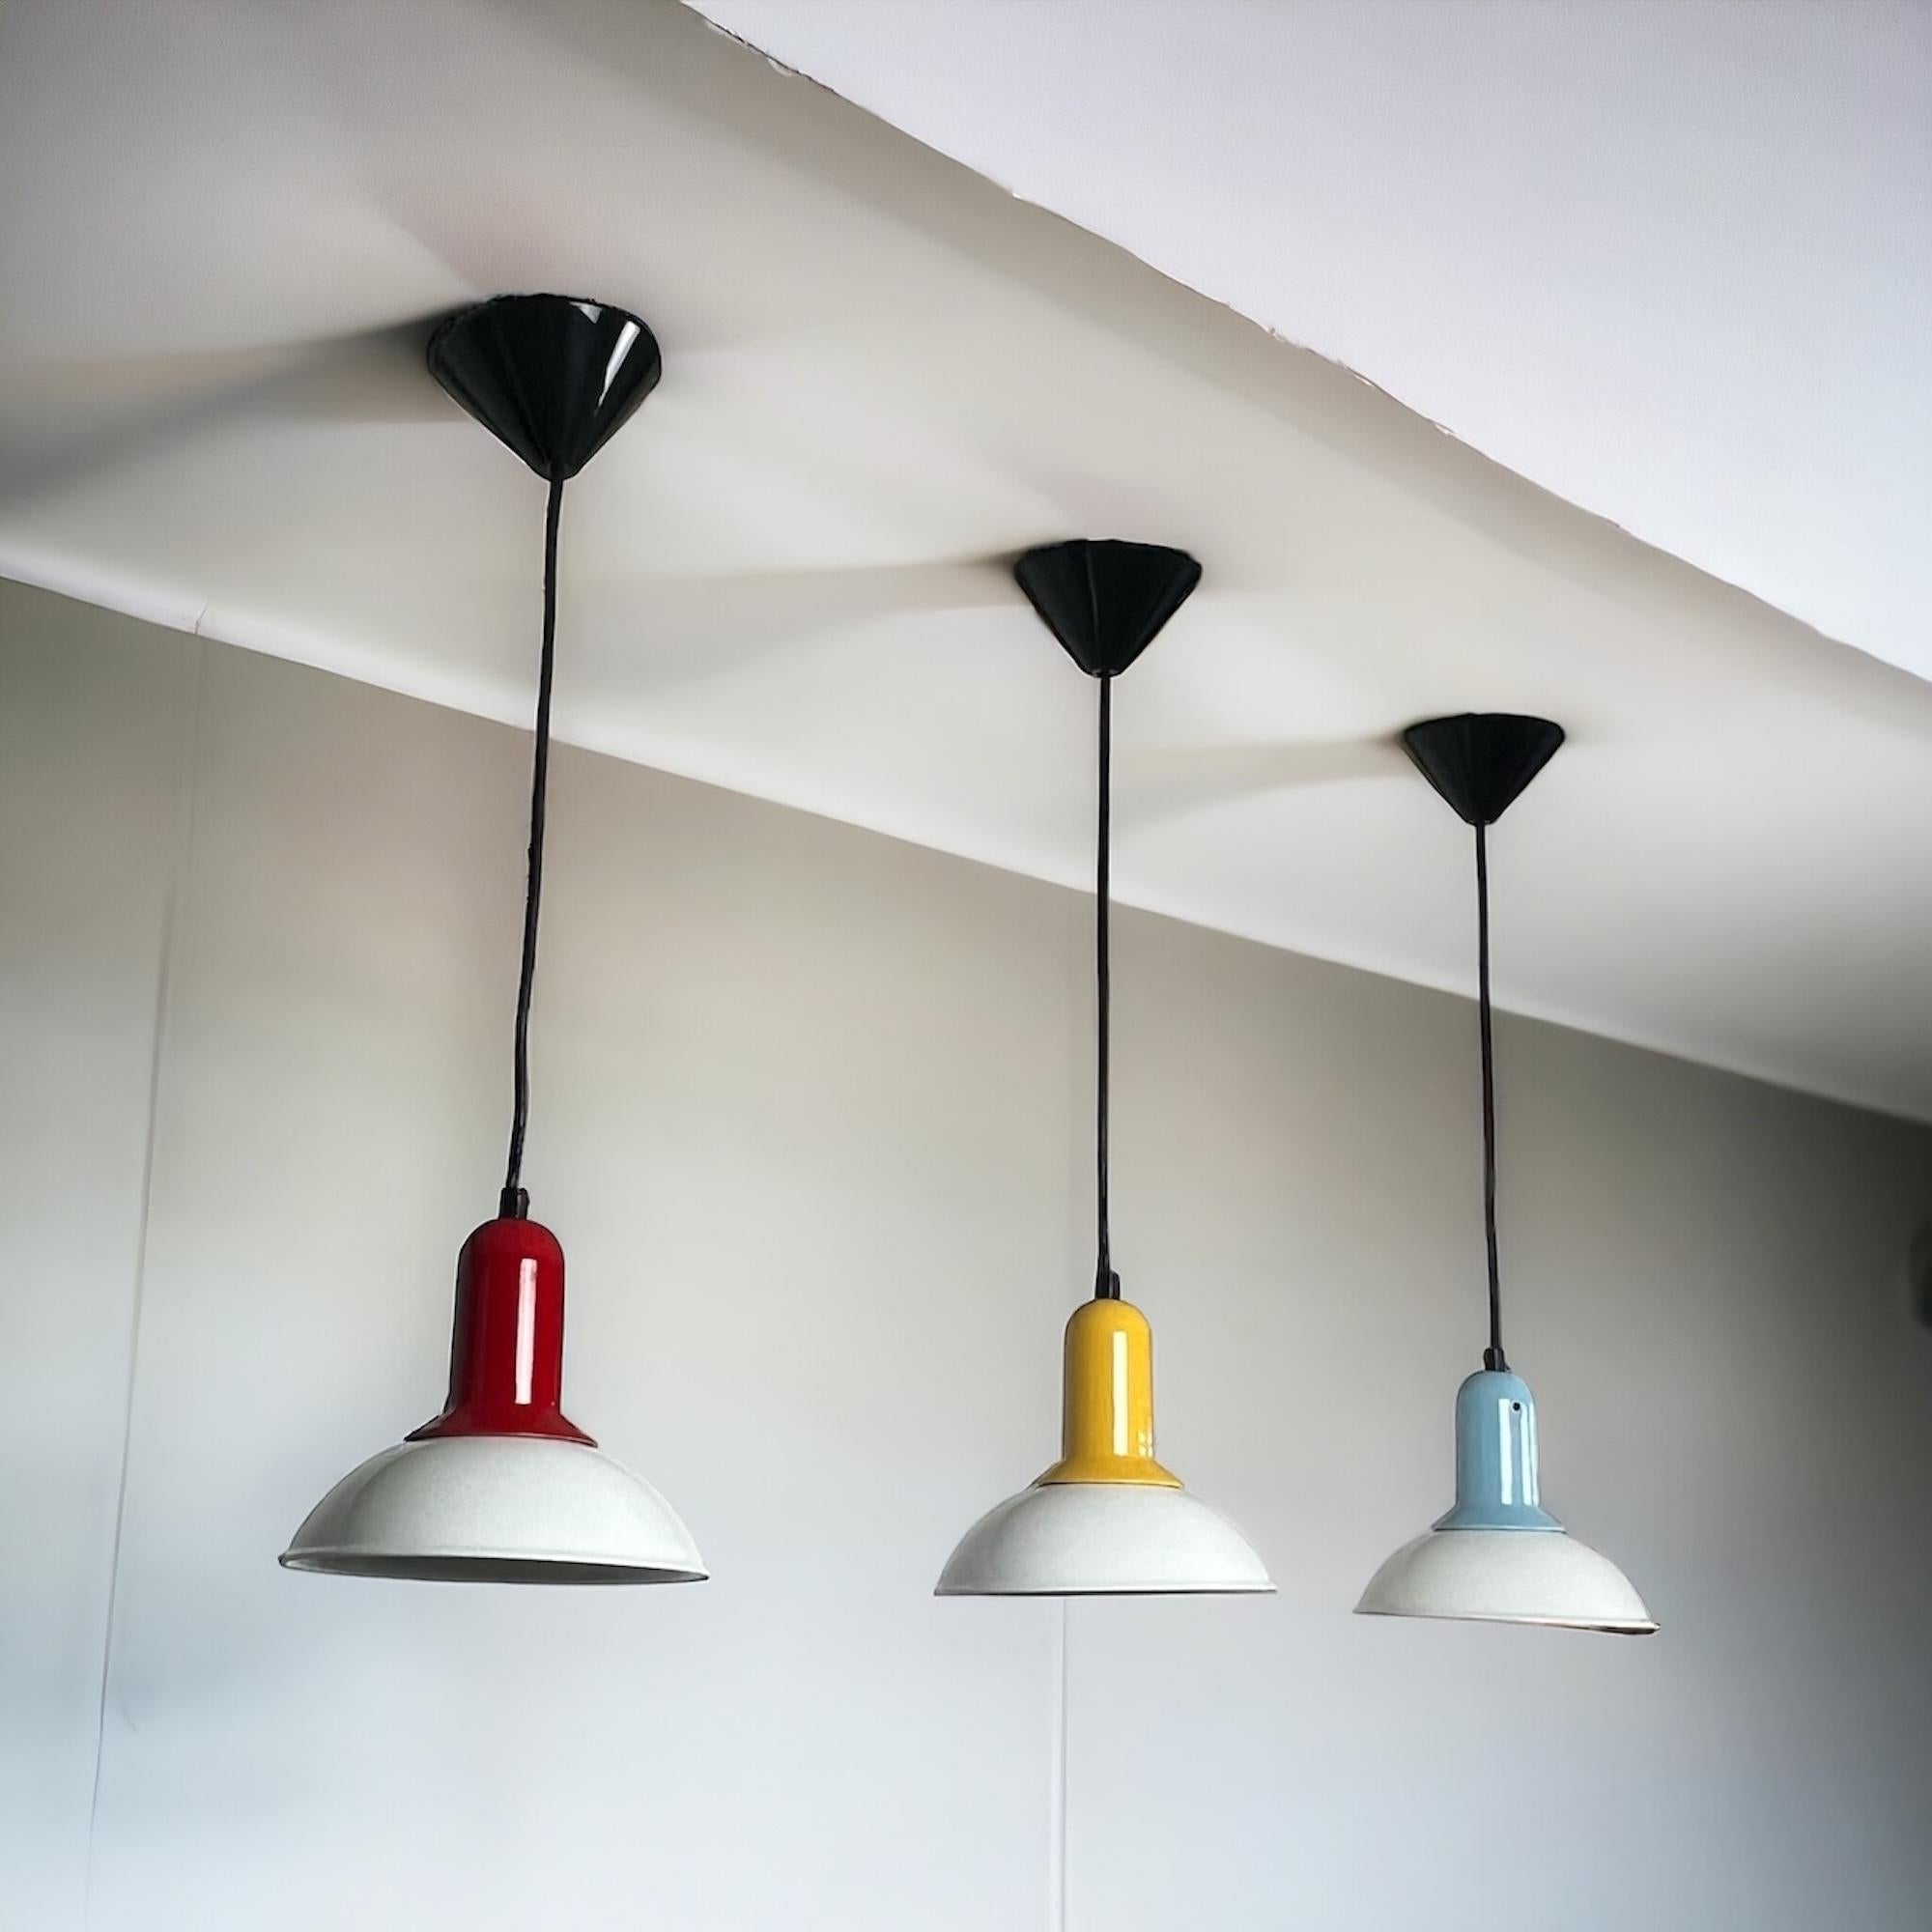 Dive into the nostalgic charm of the with Imago Italy's 80s vintage lamps set made of exquisite ceramic. Crafted with meticulous precision and imbued with the essence of a vibrant era, these lamps are a testament to the creativity and zest that